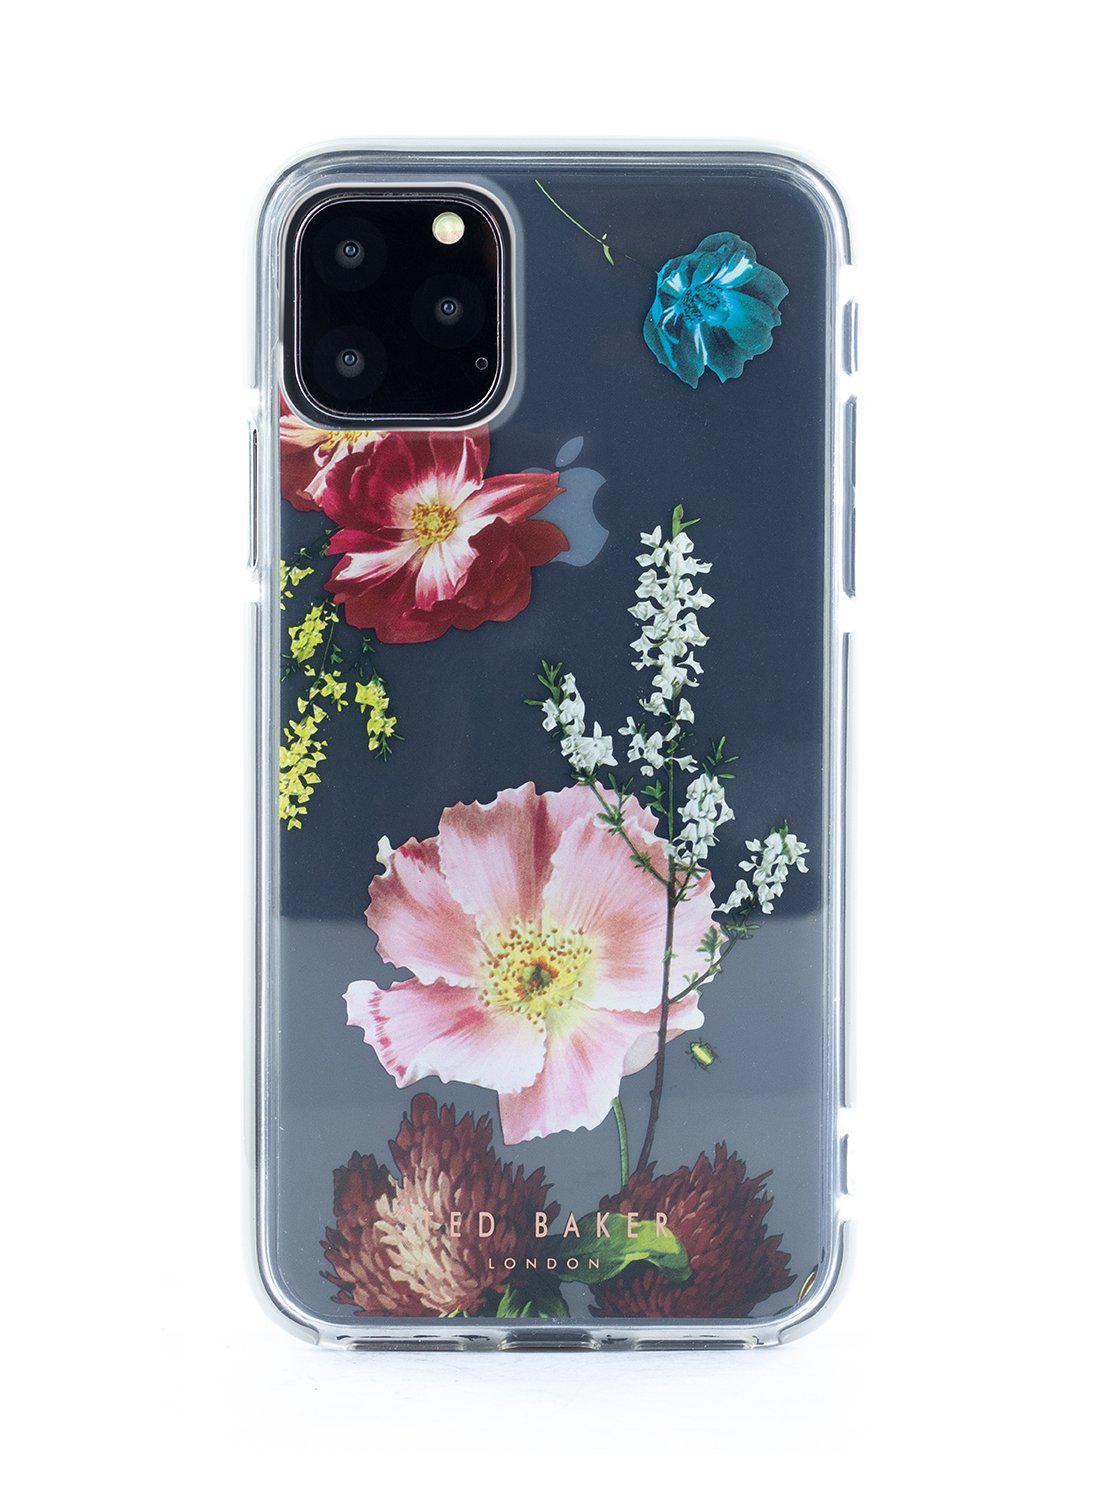 [OPEN BOX] TED BAKER Anti-Shock Forest Fruits Case for iPhone 11 Pro